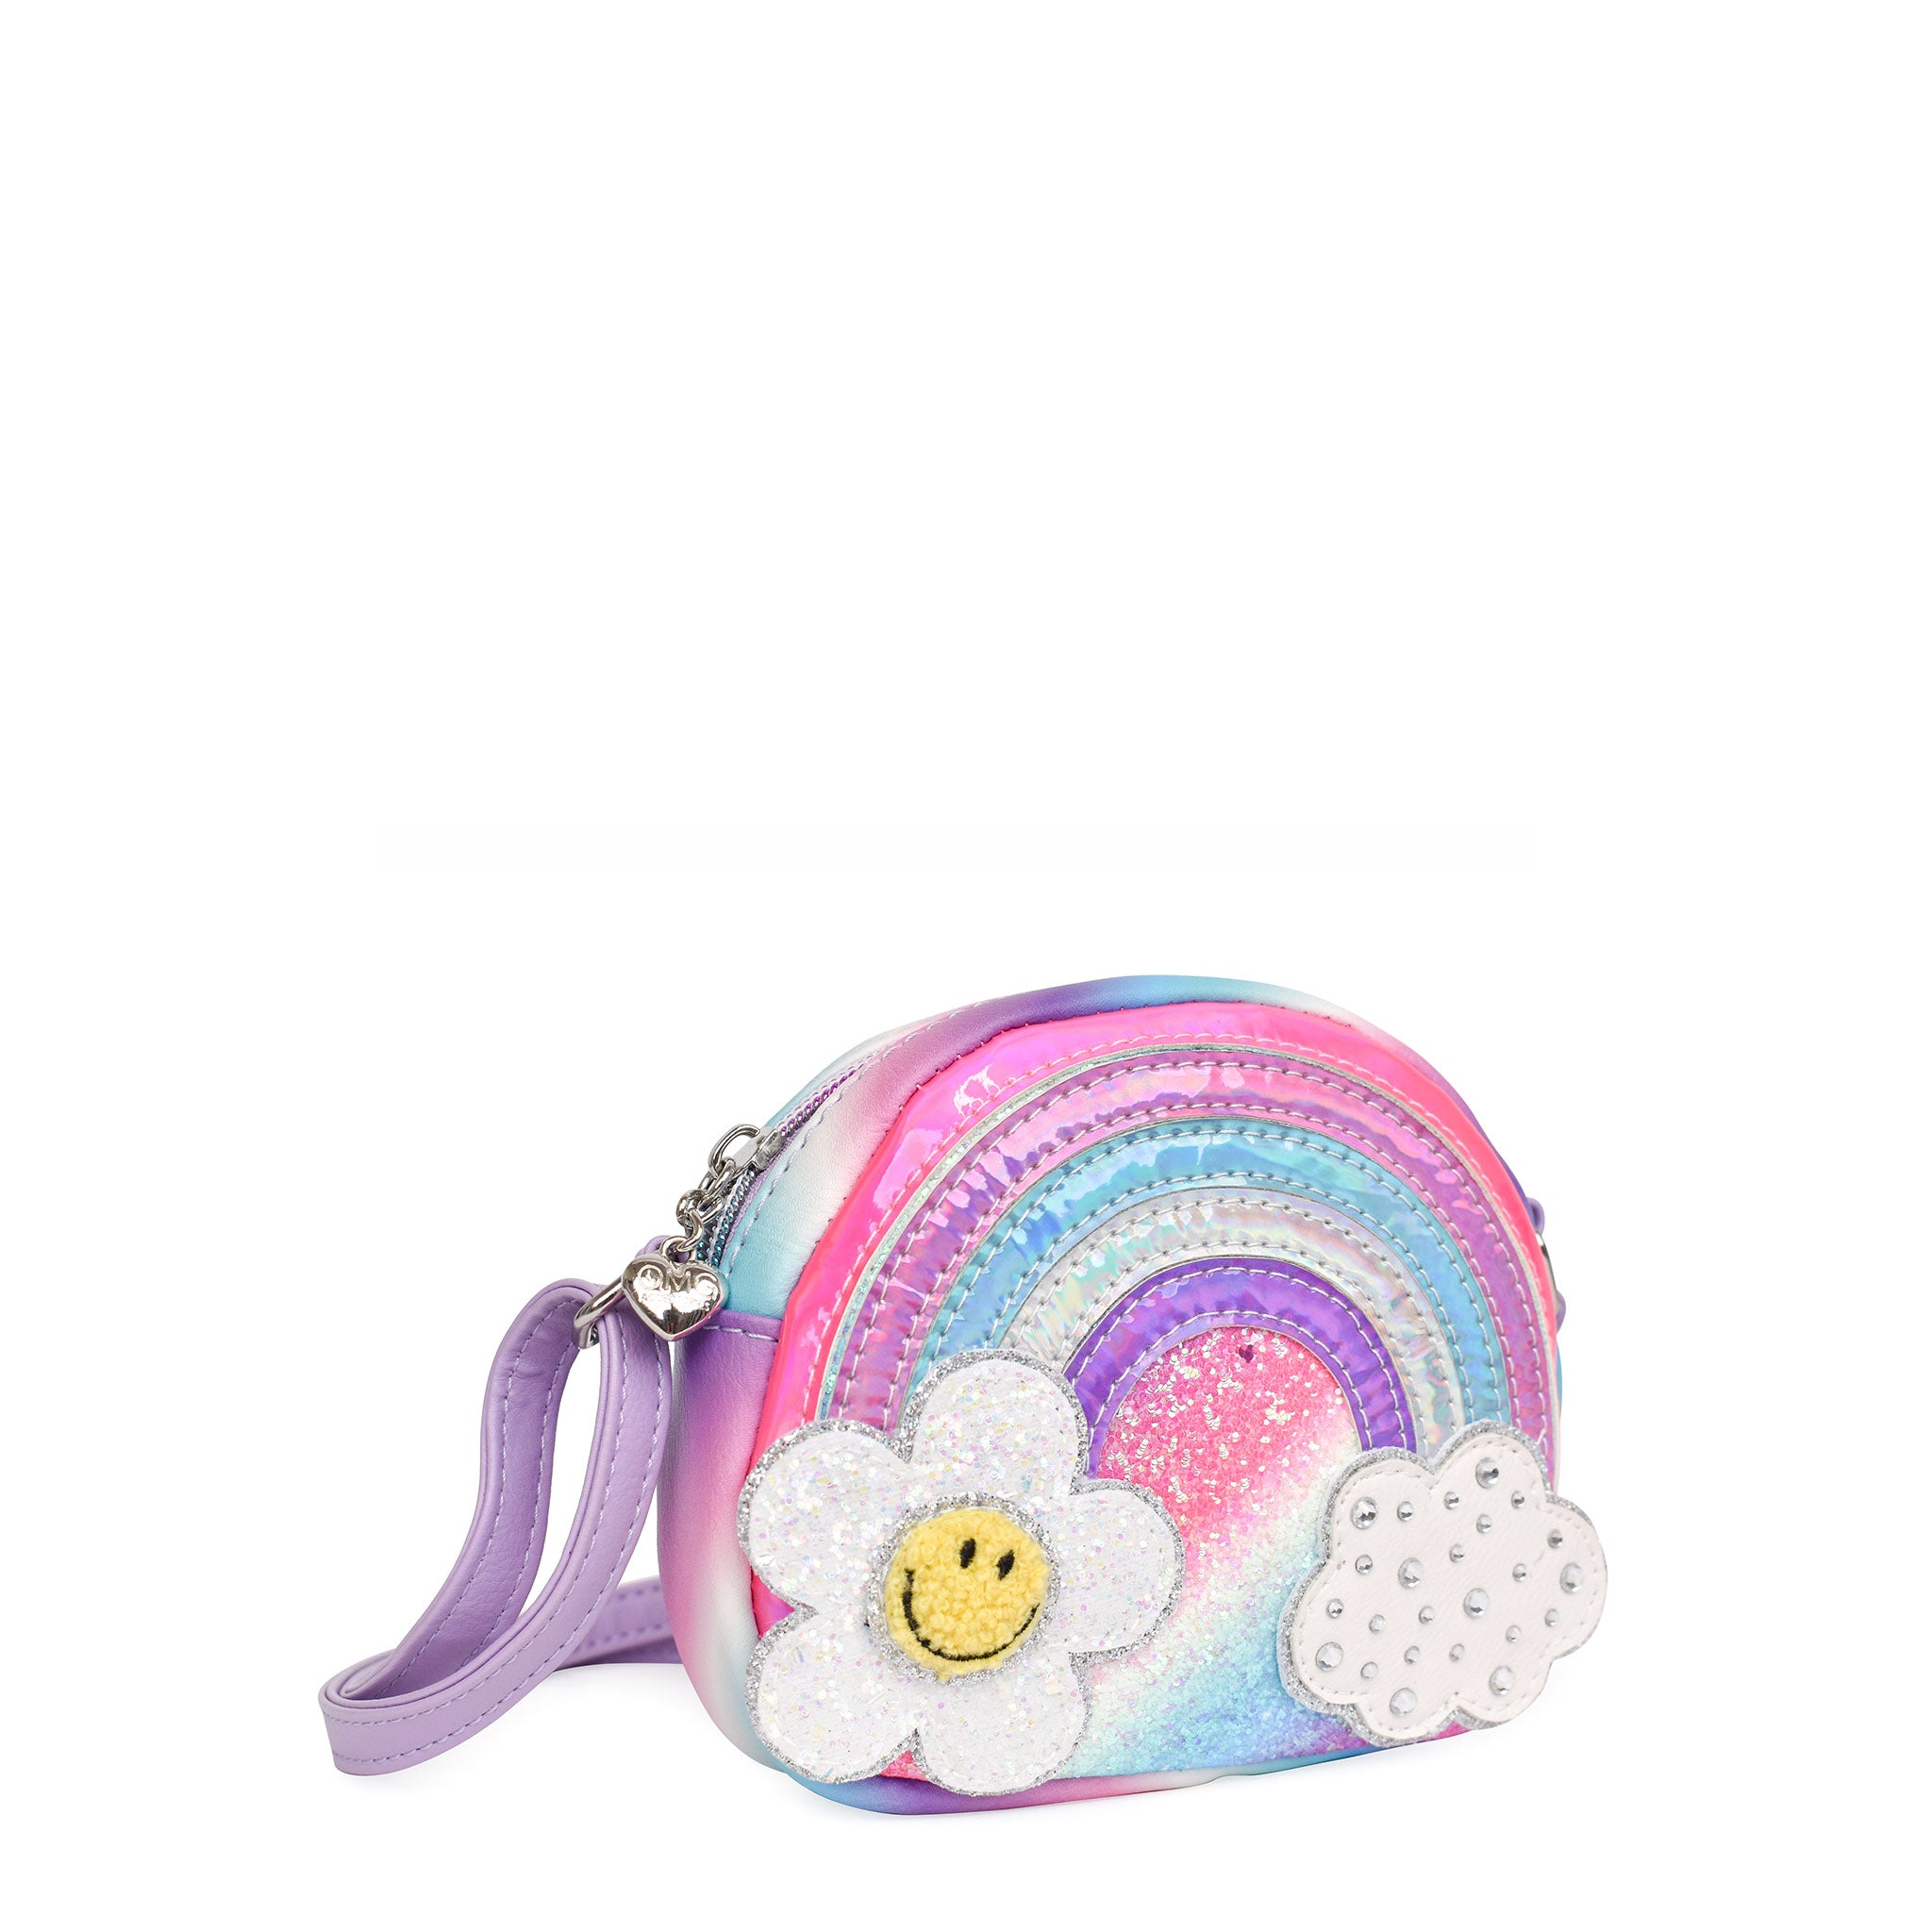 Side view of a rounded rainbow crossbody with a glitter daisy and rhinestone cloud appliqués